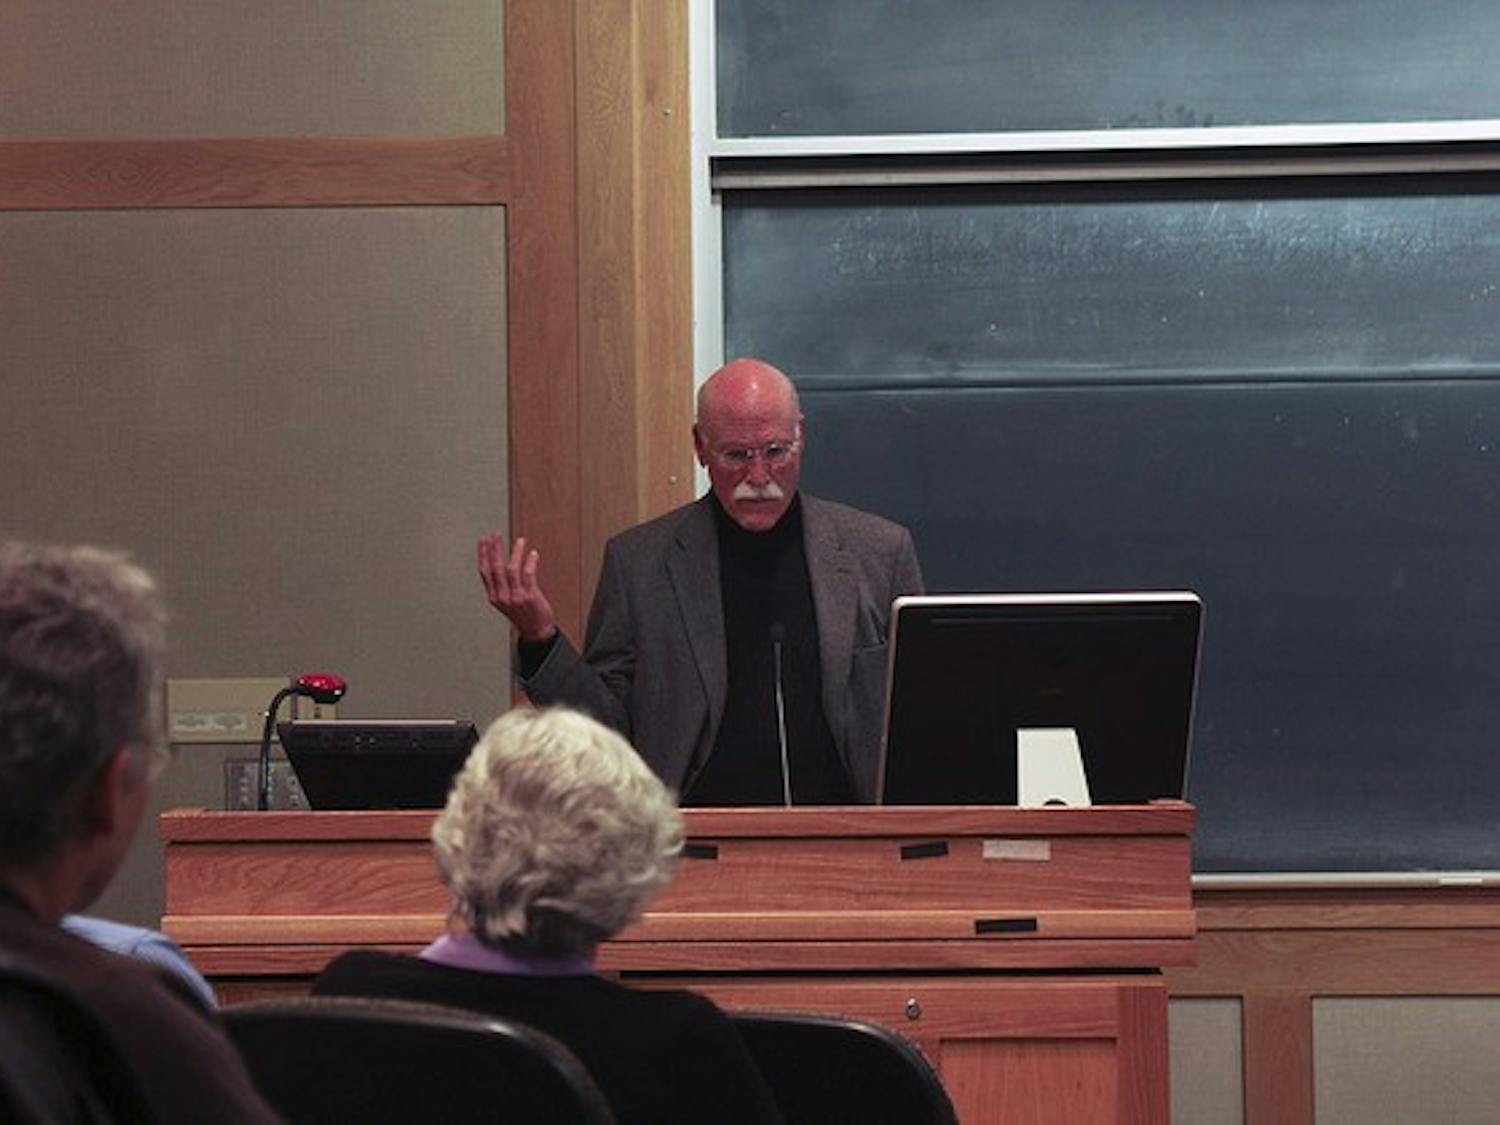 Tobias Wolff explained the importance of reading and imitating other authors' works to improve one's own writing. 